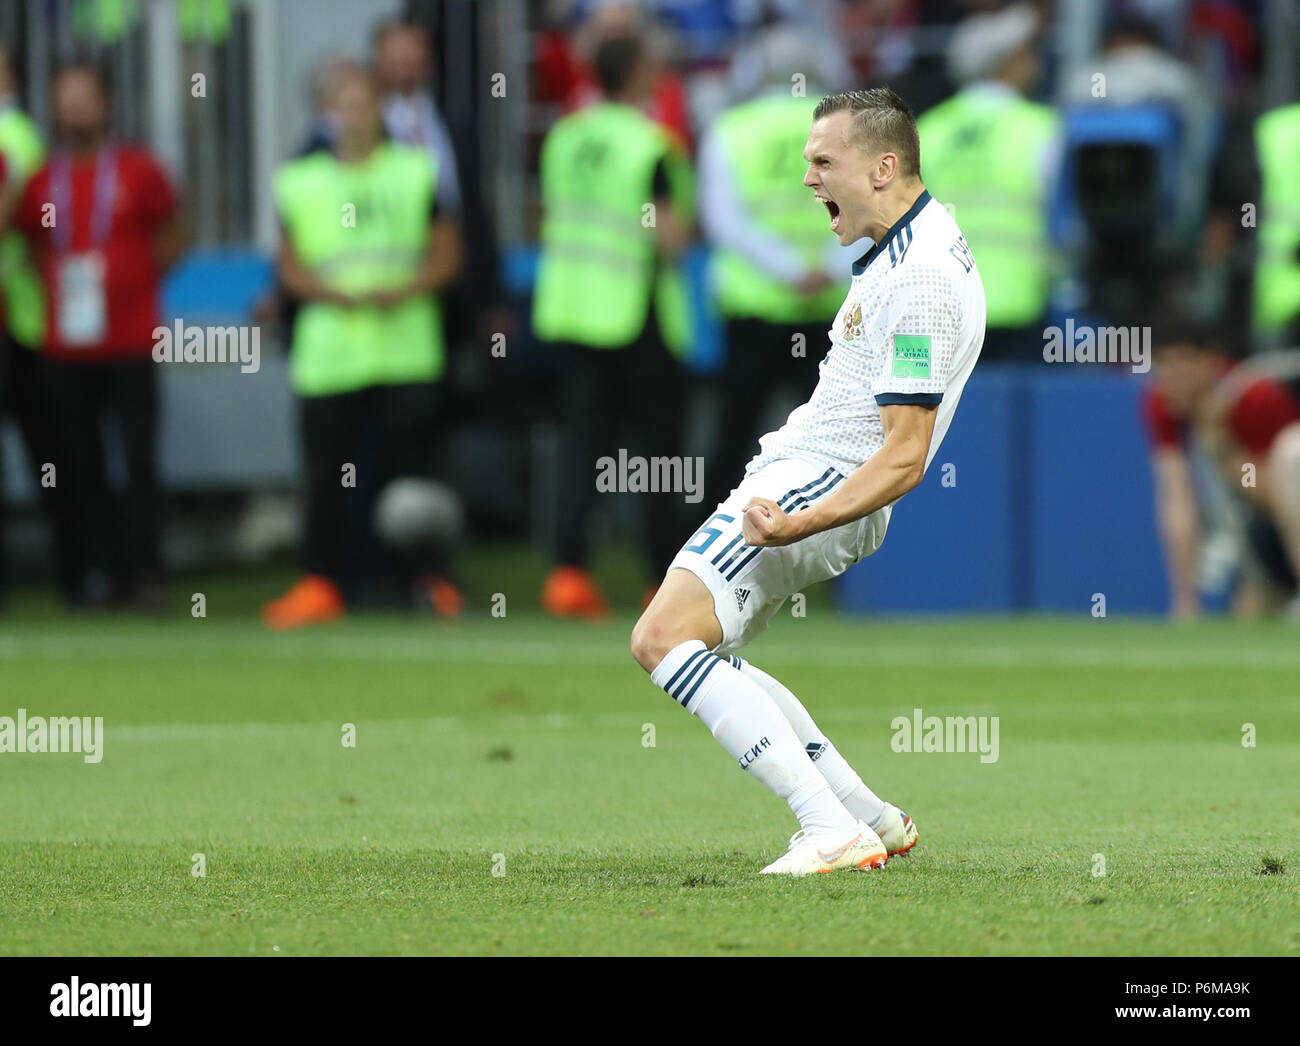 (180701) -- MOSCOW, July 1, 2018 (Xinhua) -- Denis Cheryshev of Russia celebrates after he scored a penalty kick during the 2018 FIFA World Cup round of 16 match between Spain and Russia in Moscow, Russia, July 1, 2018. Russia won 5-4 (4-3 in penalty shootout) and advanced to the quarter-final. (Xinhua/Xu Zijian) Stock Photo